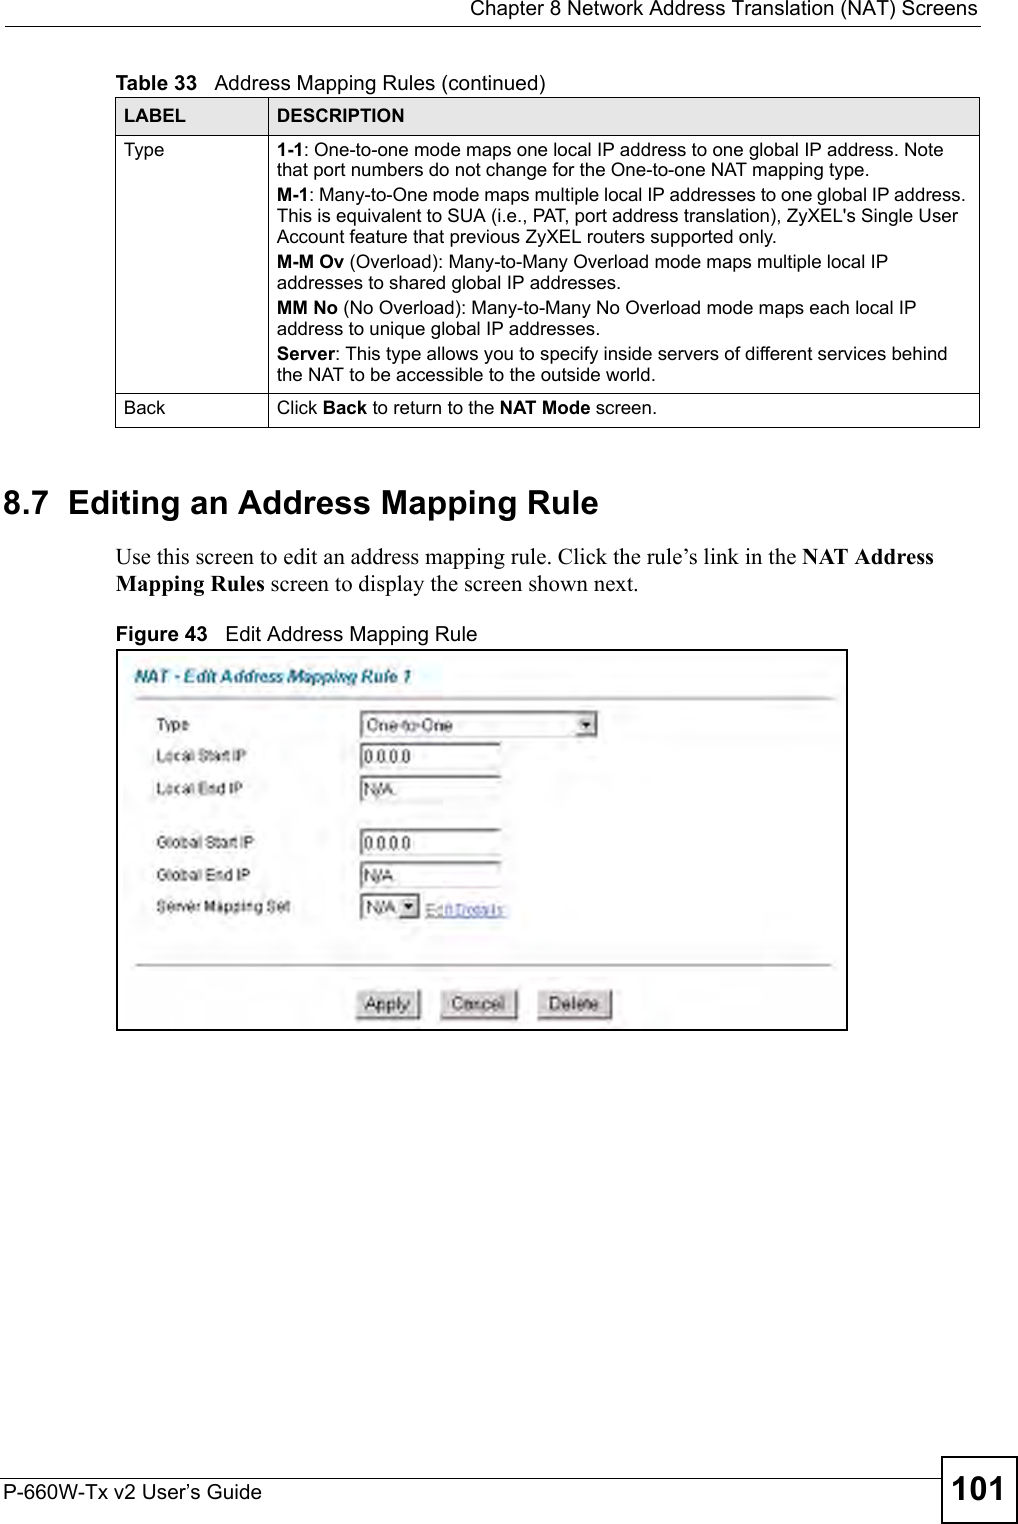  Chapter 8 Network Address Translation (NAT) ScreensP-660W-Tx v2 User’s Guide 1018.7  Editing an Address Mapping Rule Use this screen to edit an address mapping rule. Click the rule’s link in the NAT Address Mapping Rules screen to display the screen shown next. Figure 43   Edit Address Mapping Rule Type 1-1: One-to-one mode maps one local IP address to one global IP address. Note that port numbers do not change for the One-to-one NAT mapping type. M-1: Many-to-One mode maps multiple local IP addresses to one global IP address. This is equivalent to SUA (i.e., PAT, port address translation), ZyXEL&apos;s Single User Account feature that previous ZyXEL routers supported only. M-M Ov (Overload): Many-to-Many Overload mode maps multiple local IP addresses to shared global IP addresses. MM No (No Overload): Many-to-Many No Overload mode maps each local IP address to unique global IP addresses. Server: This type allows you to specify inside servers of different services behind the NAT to be accessible to the outside world. Back Click Back to return to the NAT Mode screen.Table 33   Address Mapping Rules (continued)LABEL DESCRIPTION